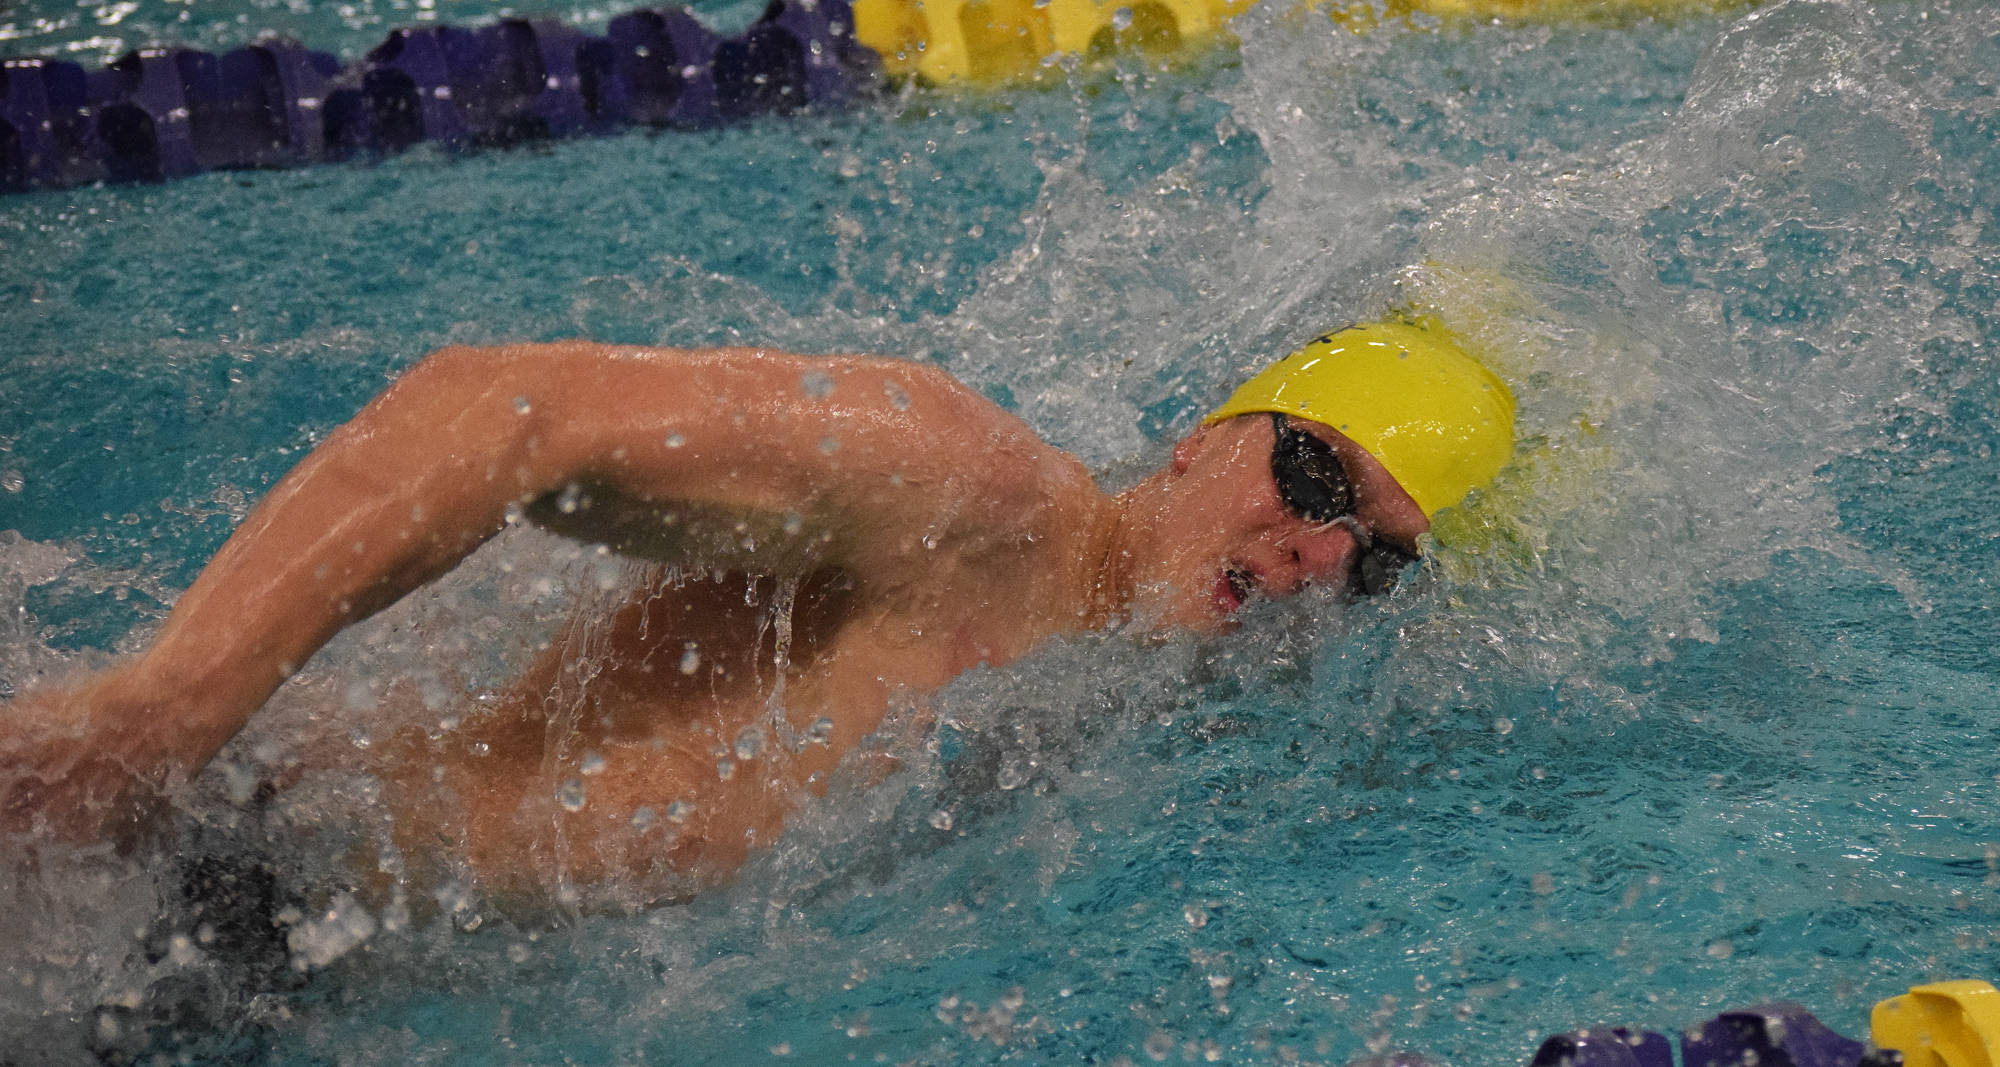 Homer’s Clayton Arndt races in the boys 100-yard freestyle final Saturday, Nov. 3, 2018 at the 2018 ASAA swimming and diving state championships at Bartlett High School in Anchorage, Alaska. (Photo by Joey Klecka/Peninsula Clarion)